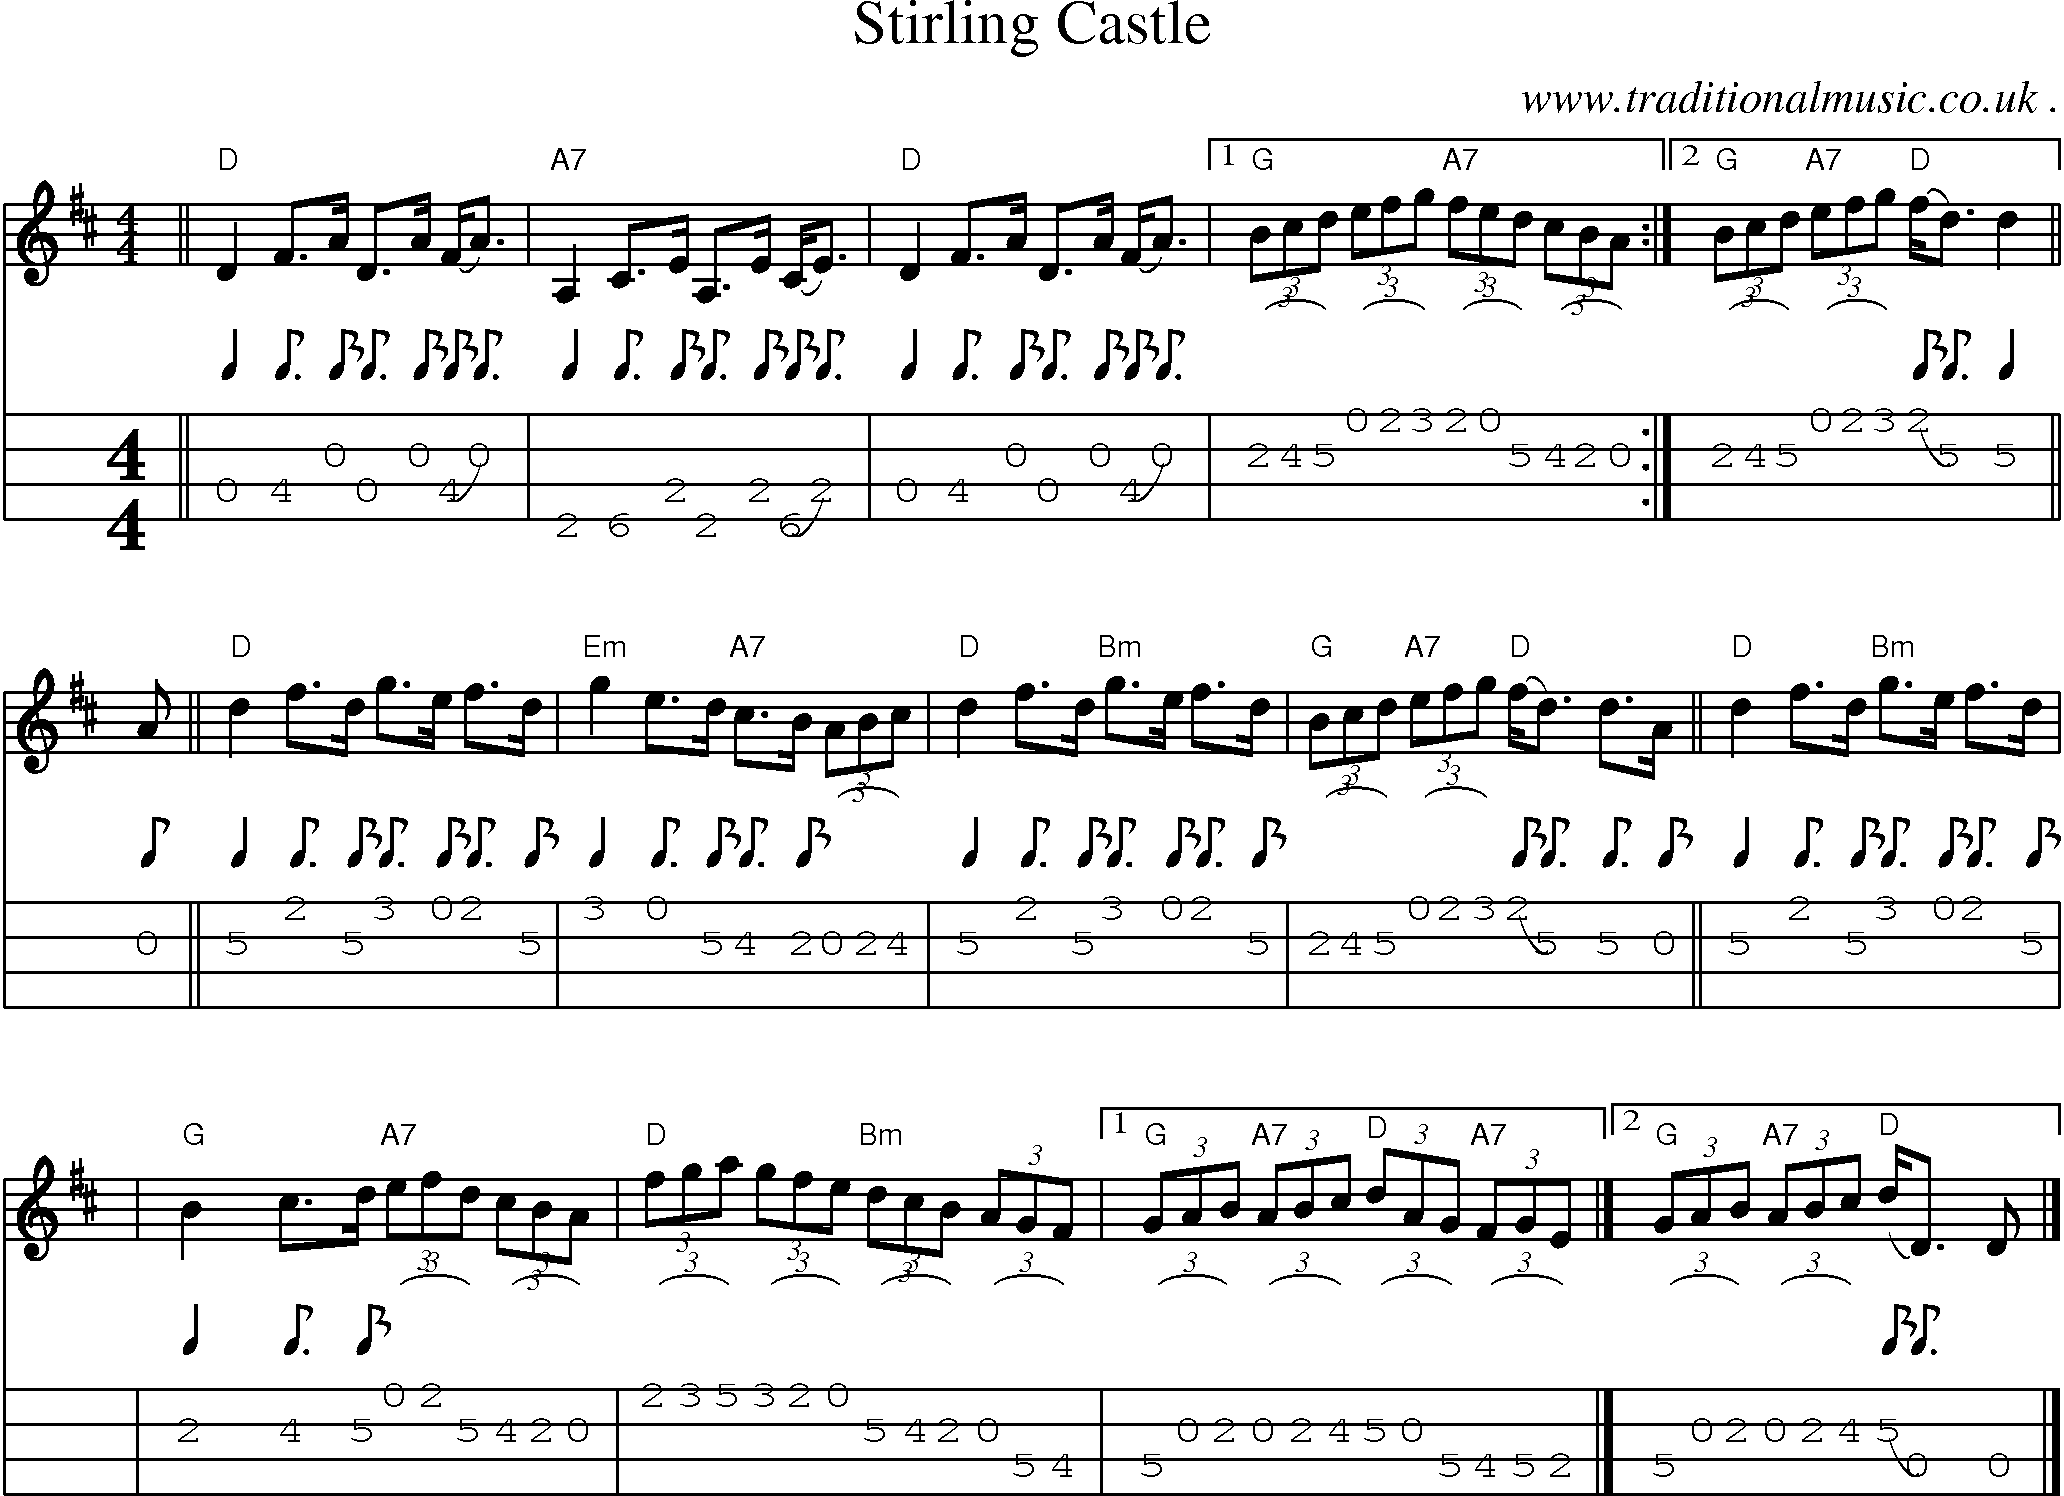 Sheet-music  score, Chords and Mandolin Tabs for Stirling Castle